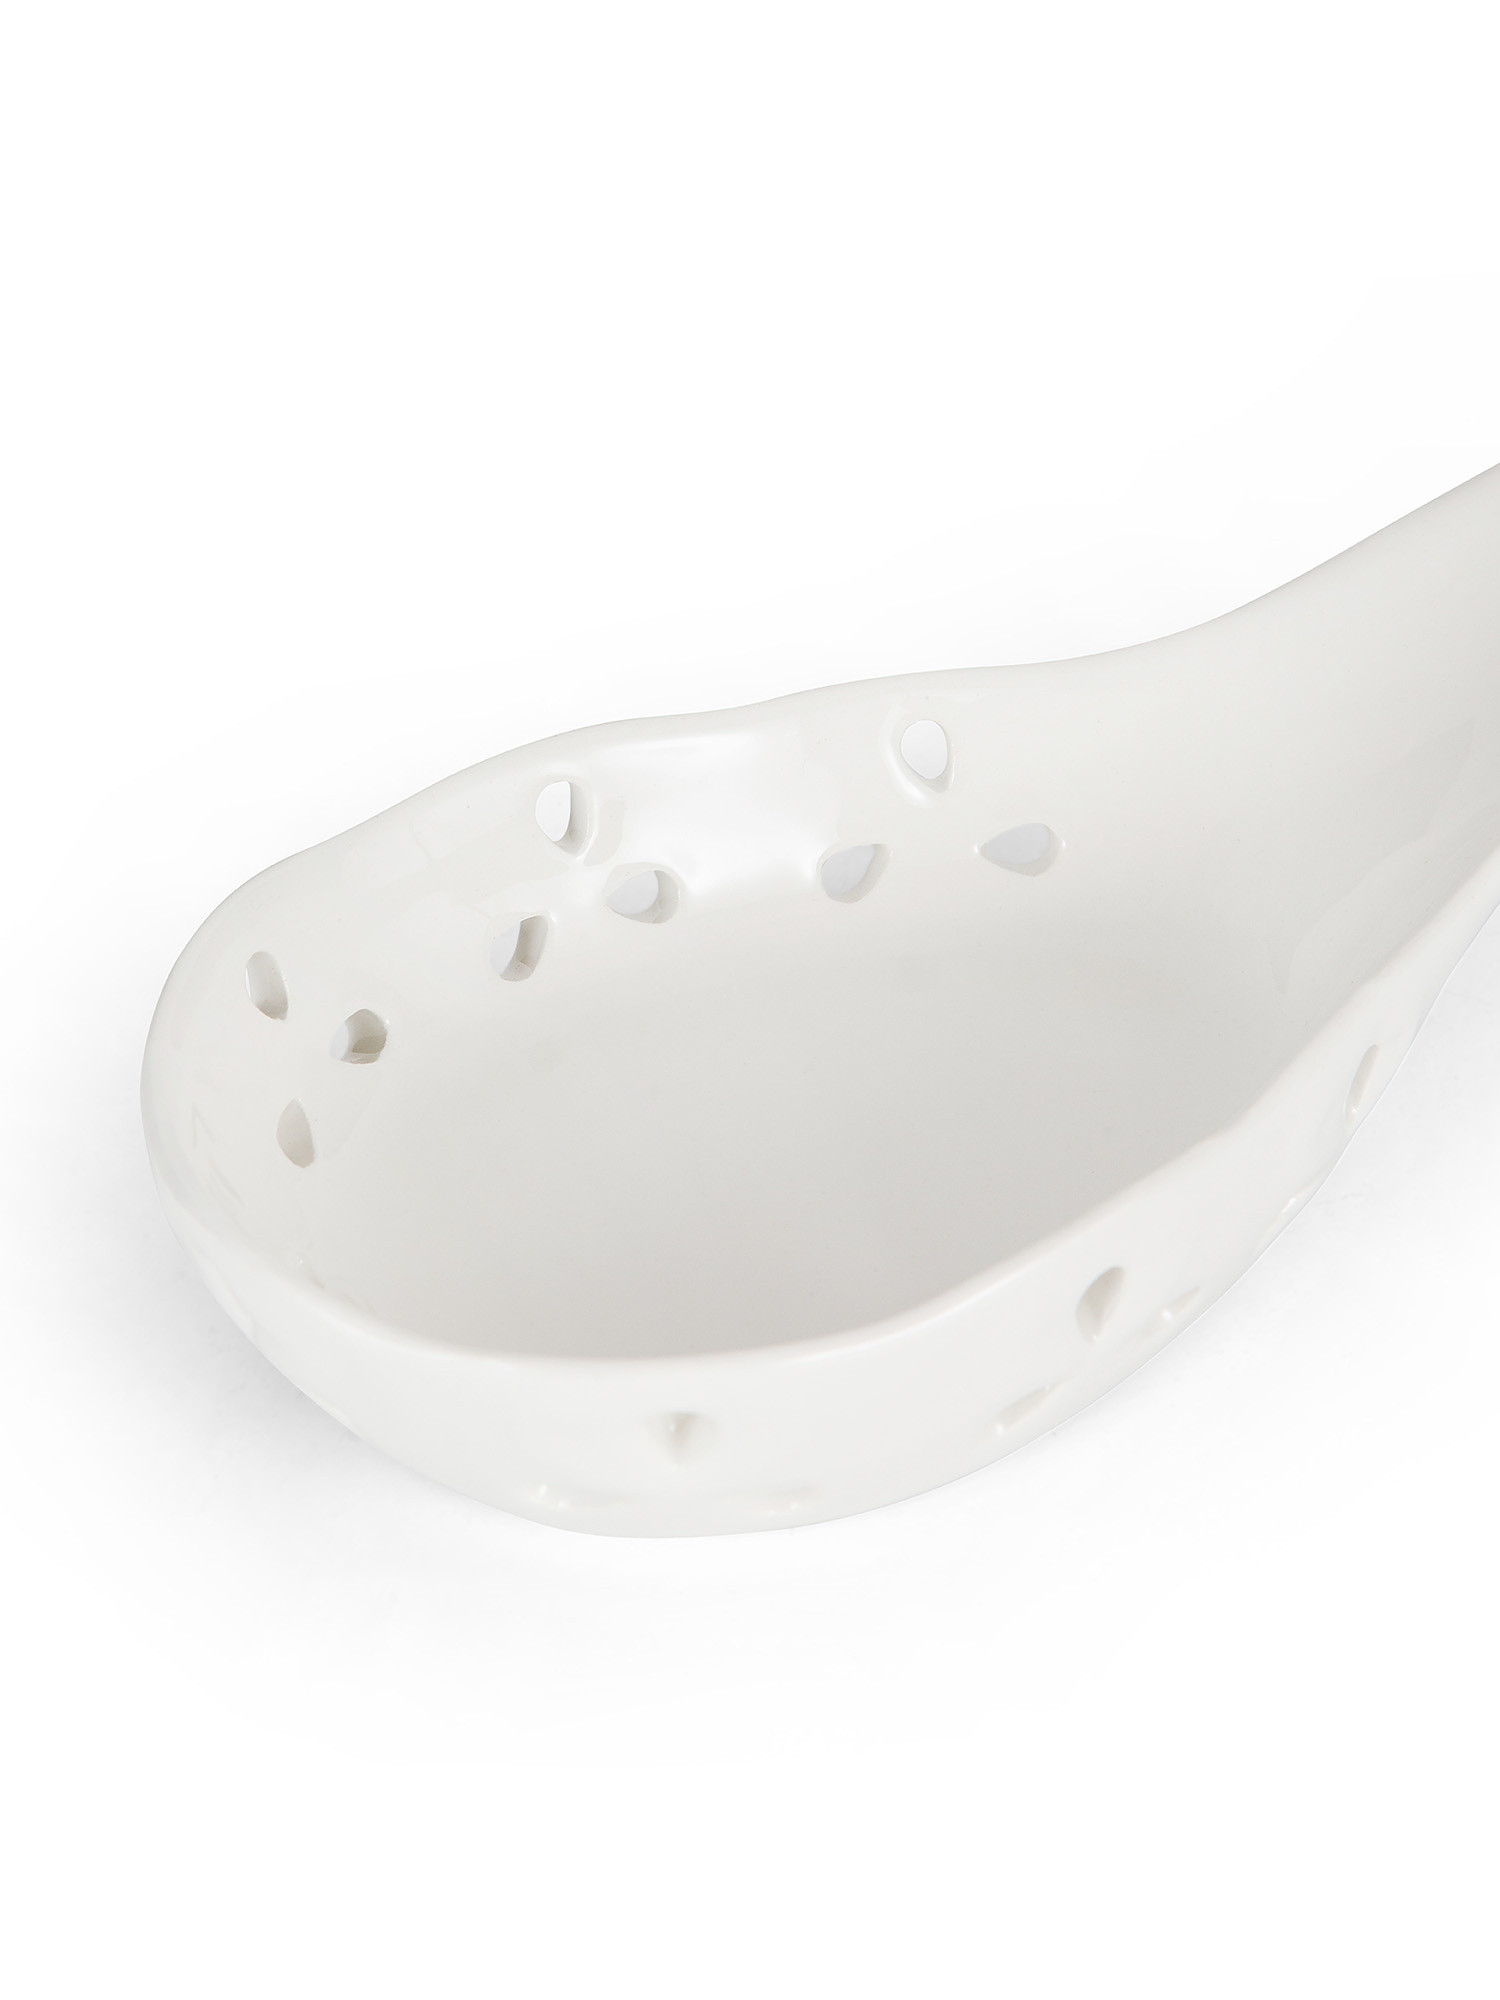 Ceramic spoon holder with perforated edge, White, large image number 1